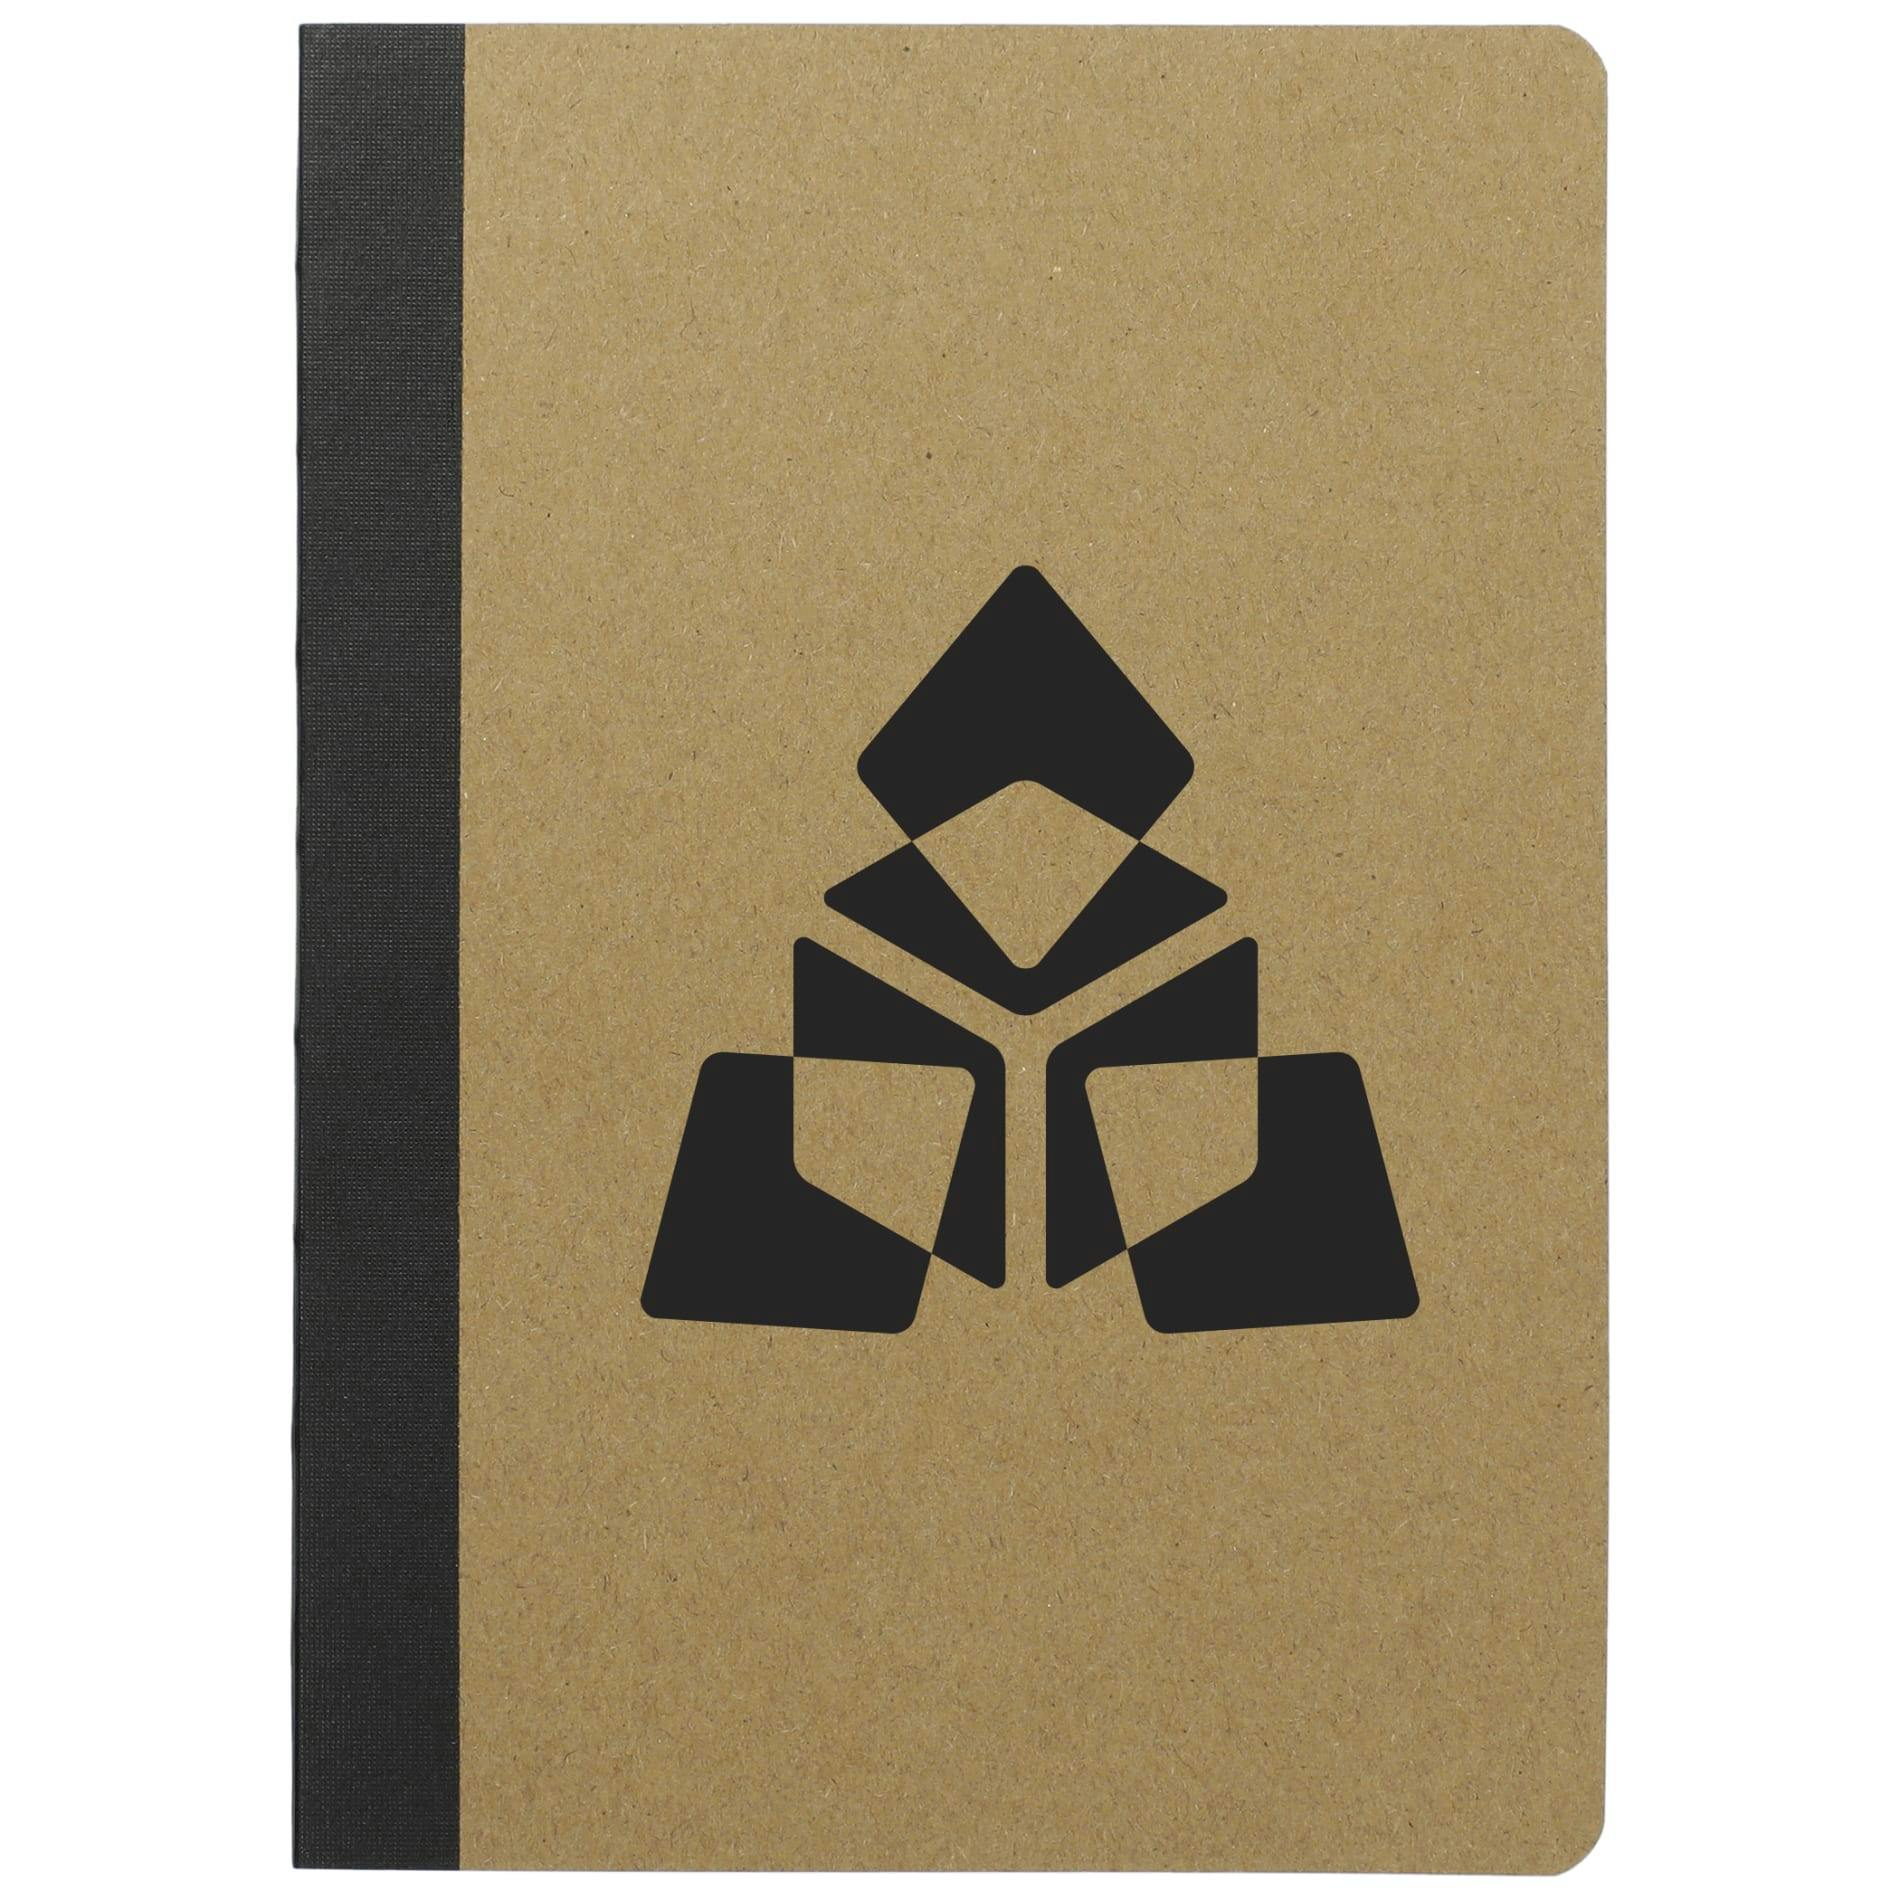 5" x 7" FSC® Mix Composition Notebook - additional Image 2